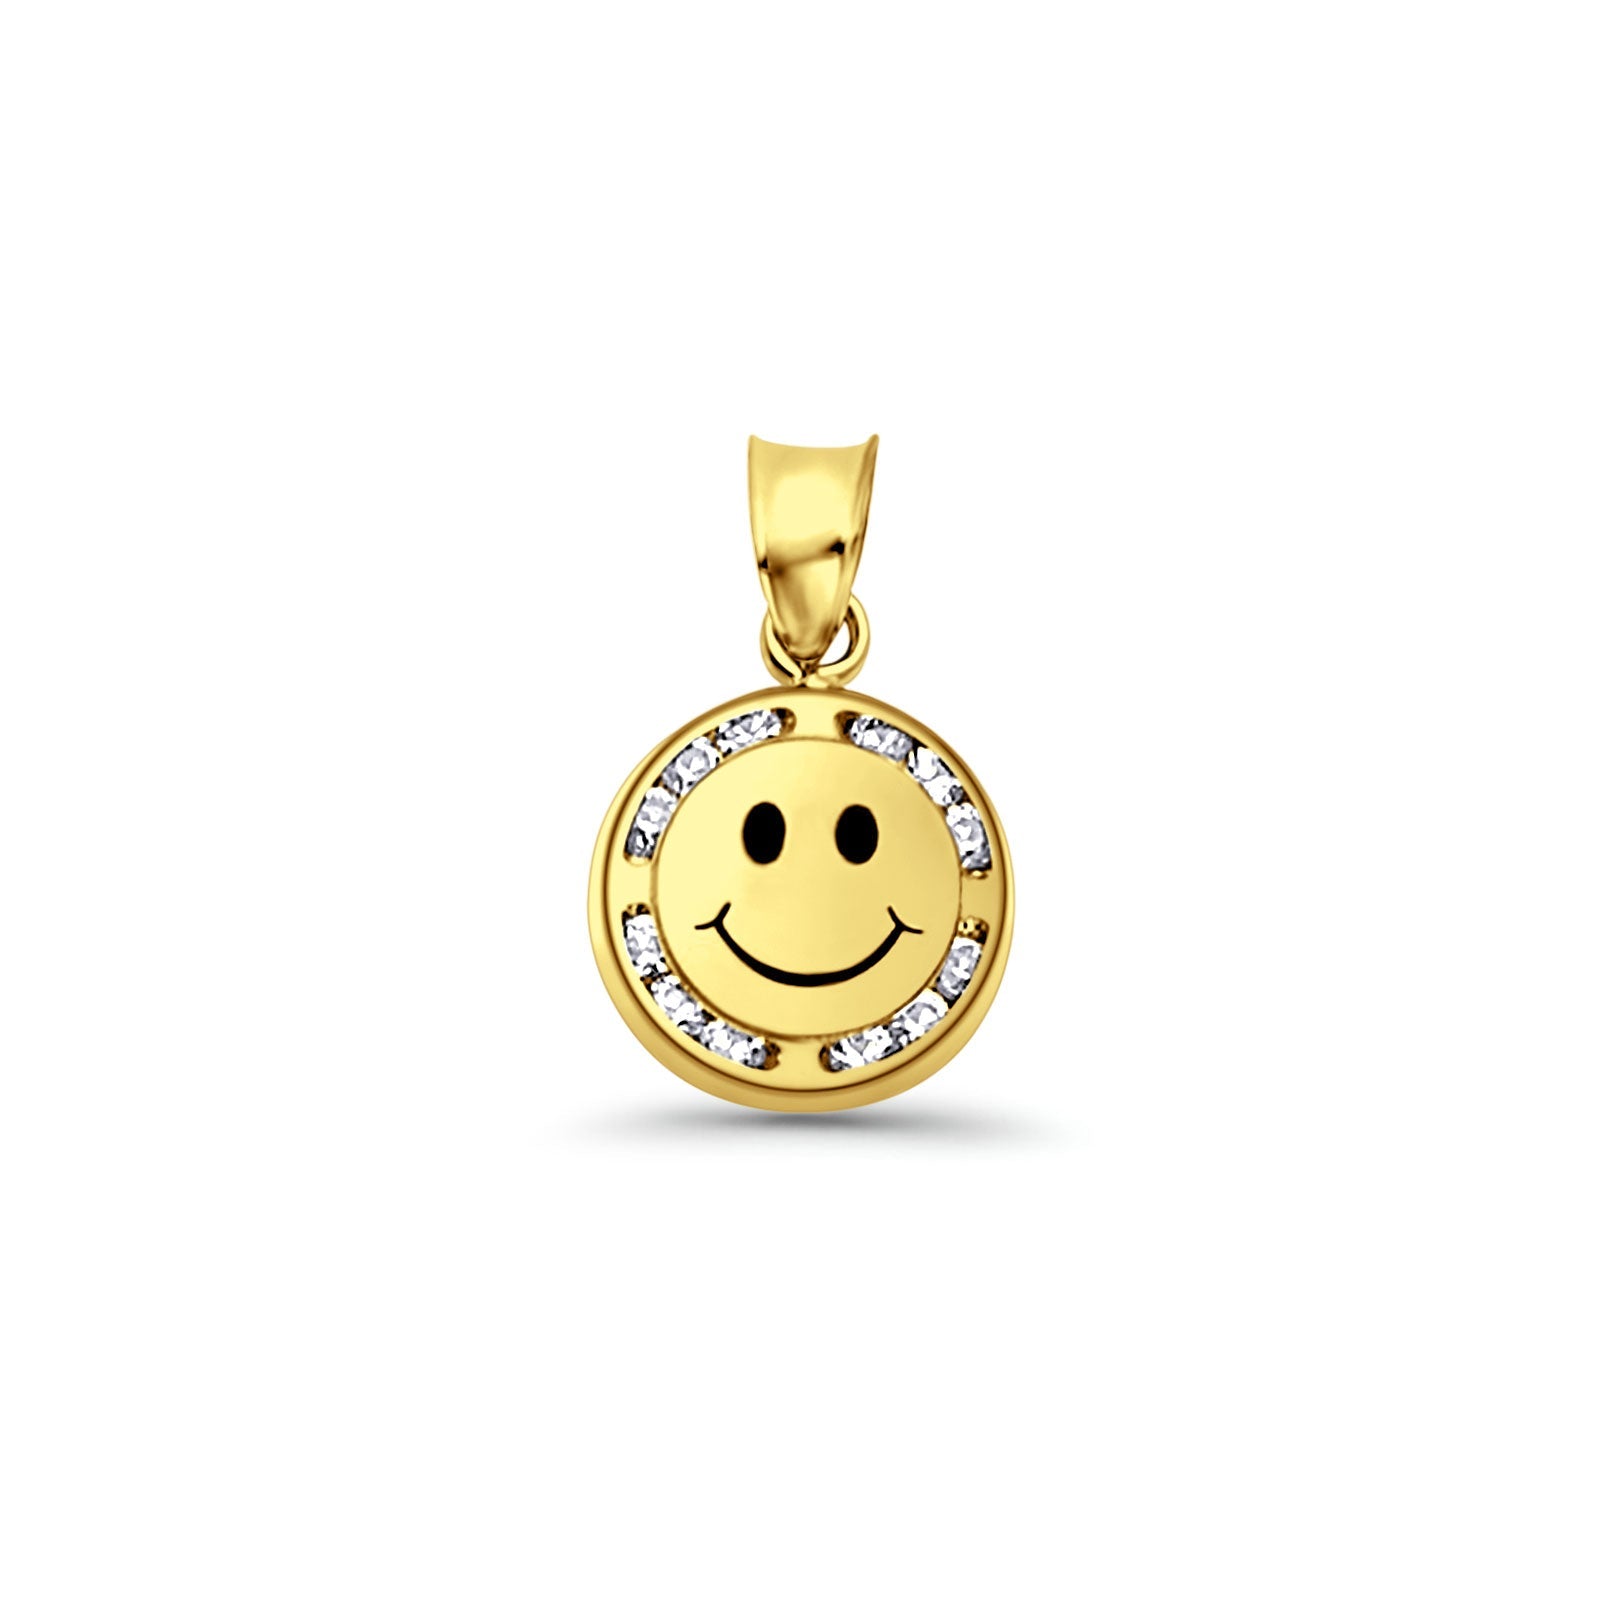 14K Yellow Gold CZ Smile Pendant 17mmX9mm With 16 Inch To 24 Inch 0.8MM Width D.C. Round Wheat Chain Necklace